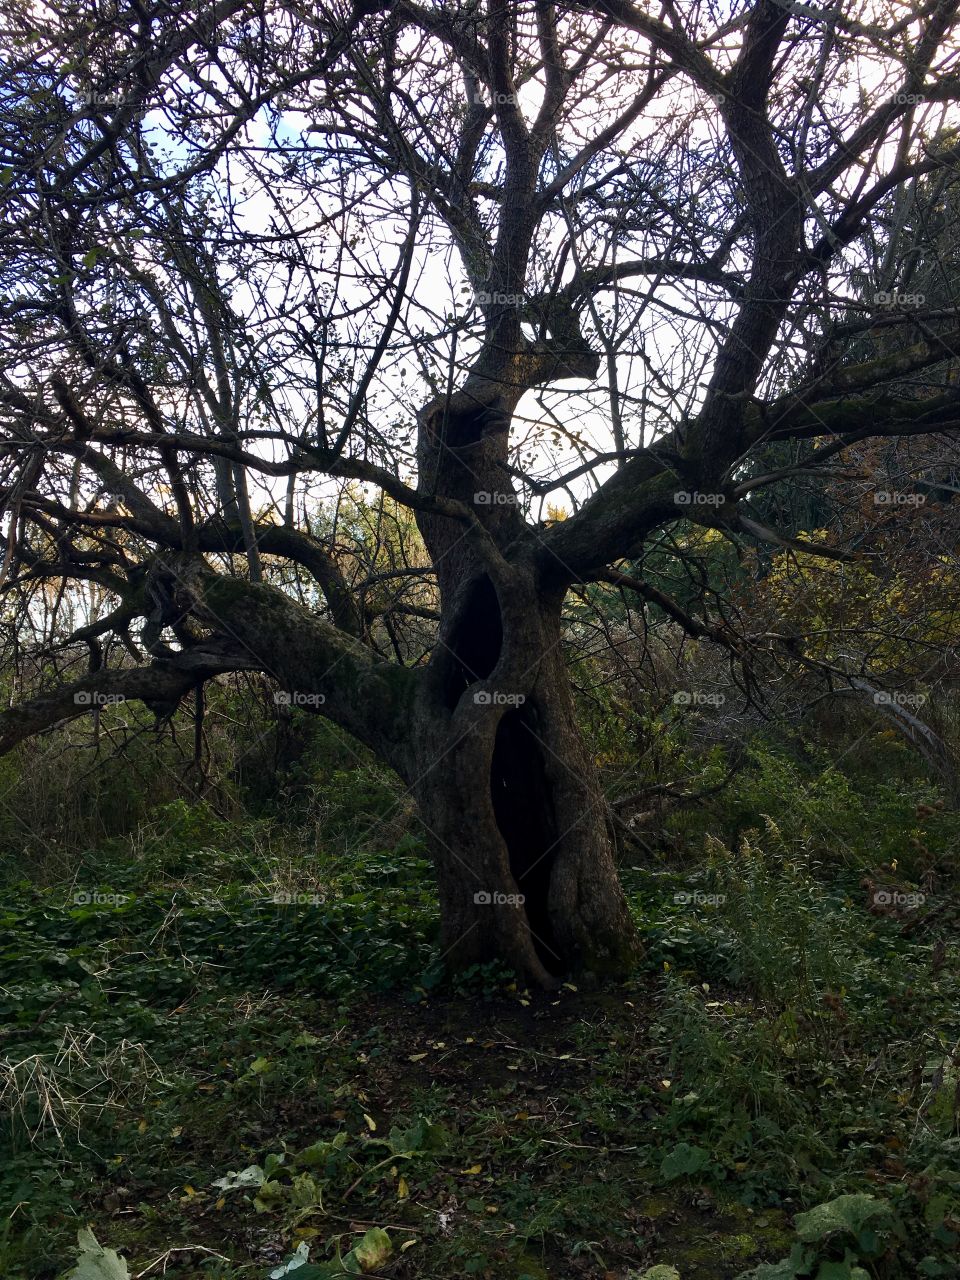 Haunted looking tree, inhabited by the spirits of animals. Also inhabited with living animals. Tree is long dead with gaping holes throughout. Though surrounding the tree is green foliage.